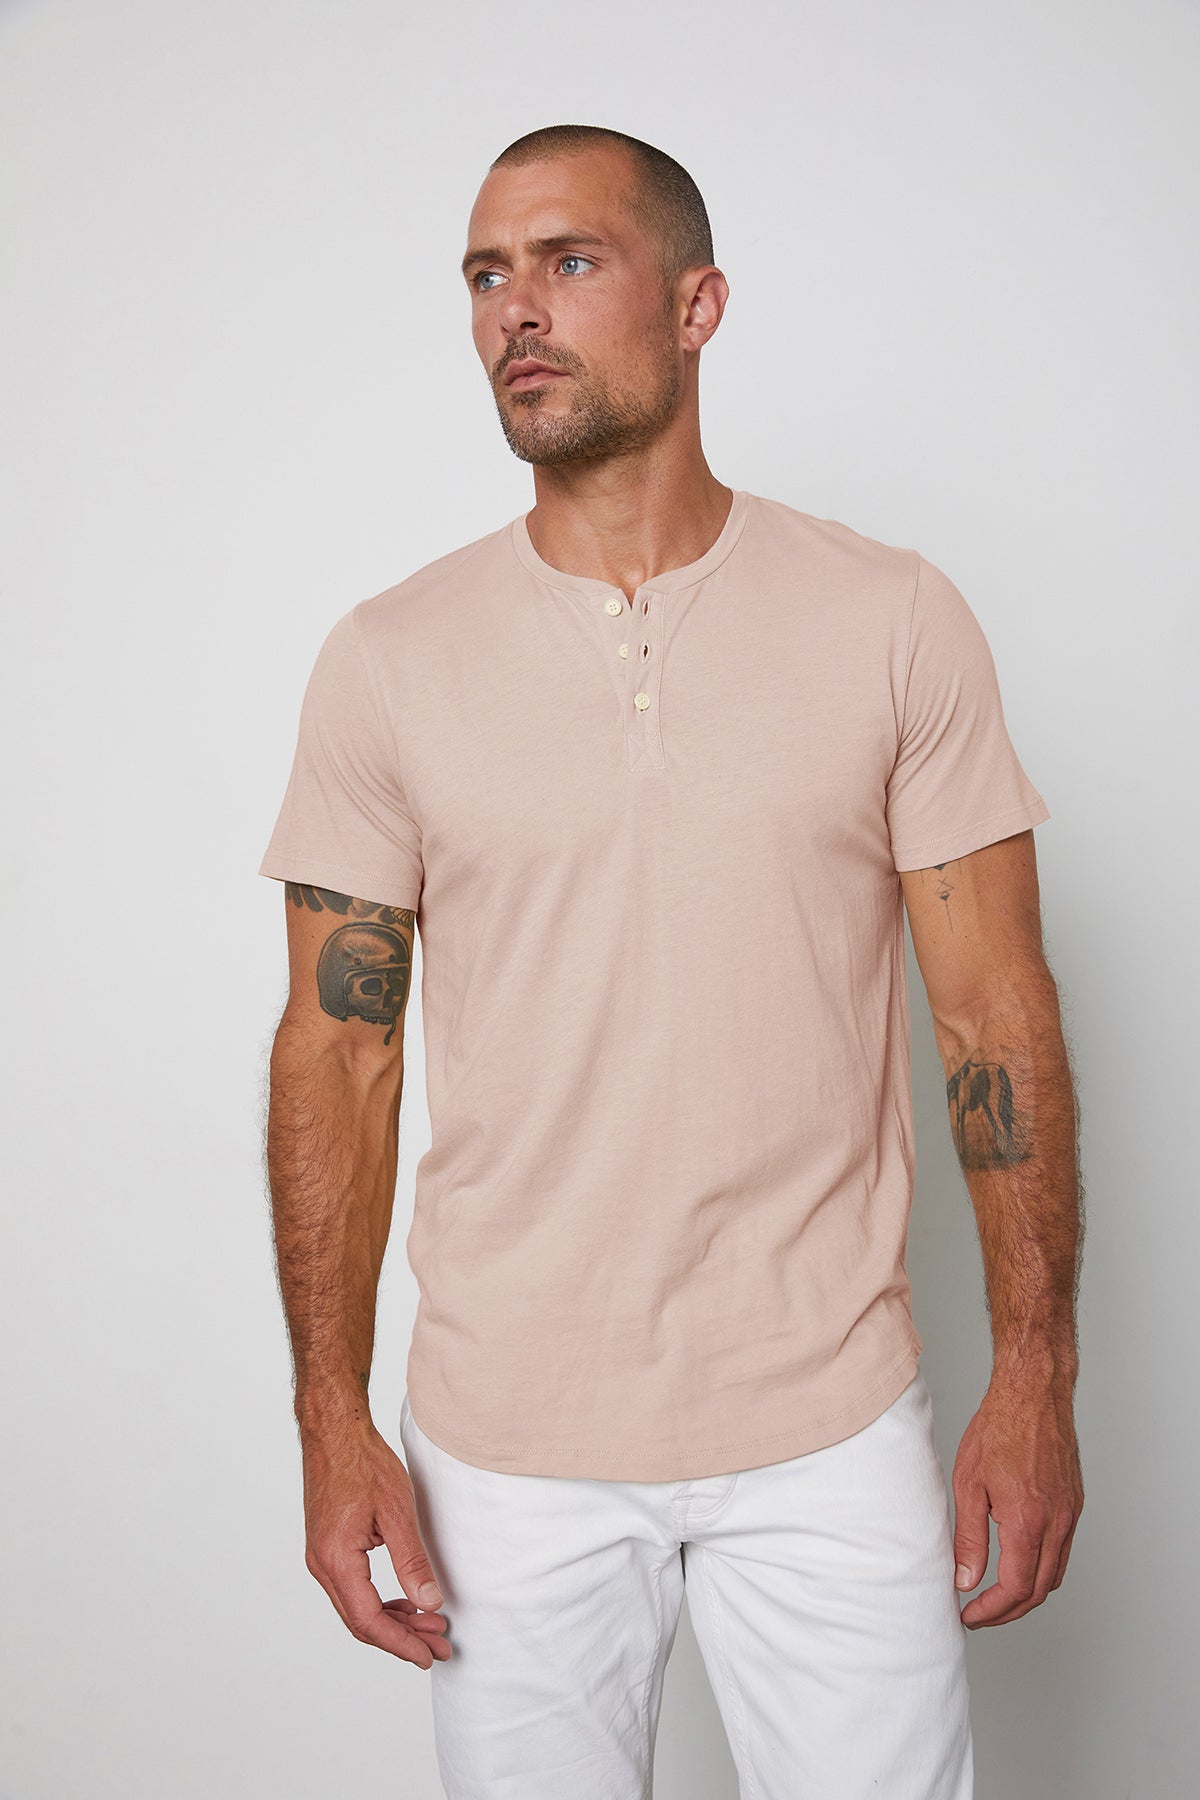 Fulton Short Sleeve Henley in light pink color bloom with white pants front view-35567477162177